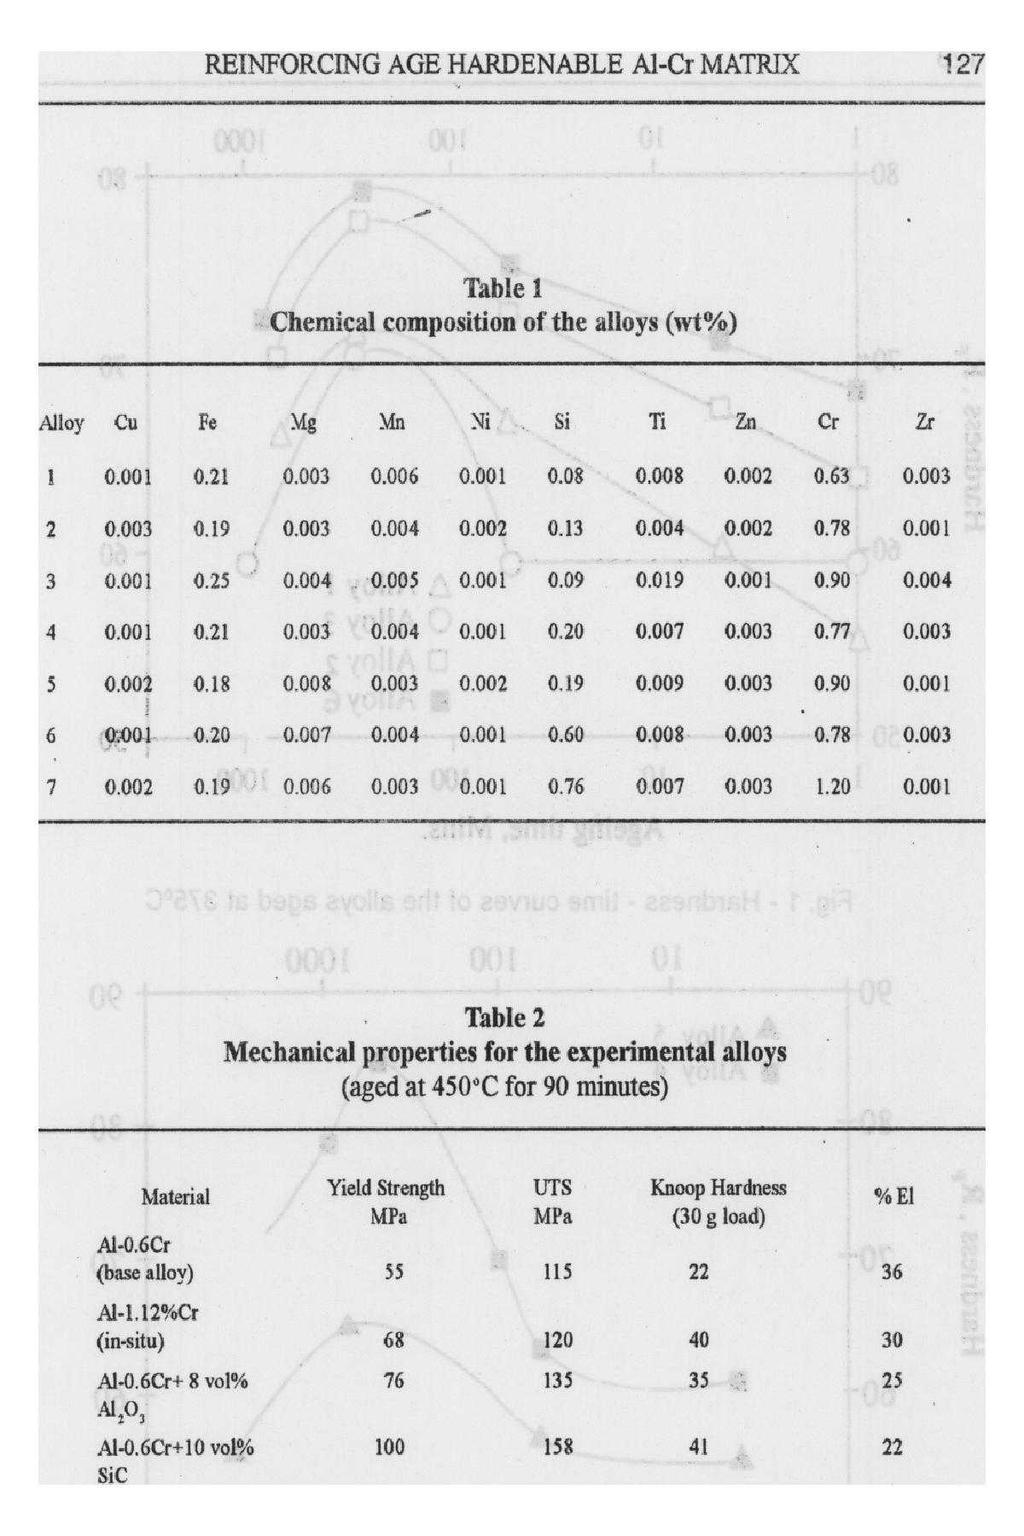 REINFORCING AGE HARDENABLE Al-Cr MATRIX 127 Table 1 Chemical composition of the alloys (wt%) Alloy Cu Fe Mg Mn Ni. Si Ti Zn Cr Zr 1 0.001 0.21 0.003 0.006 0.001 0.08 0. 008 0.002 0, 63 0.003 2 0.